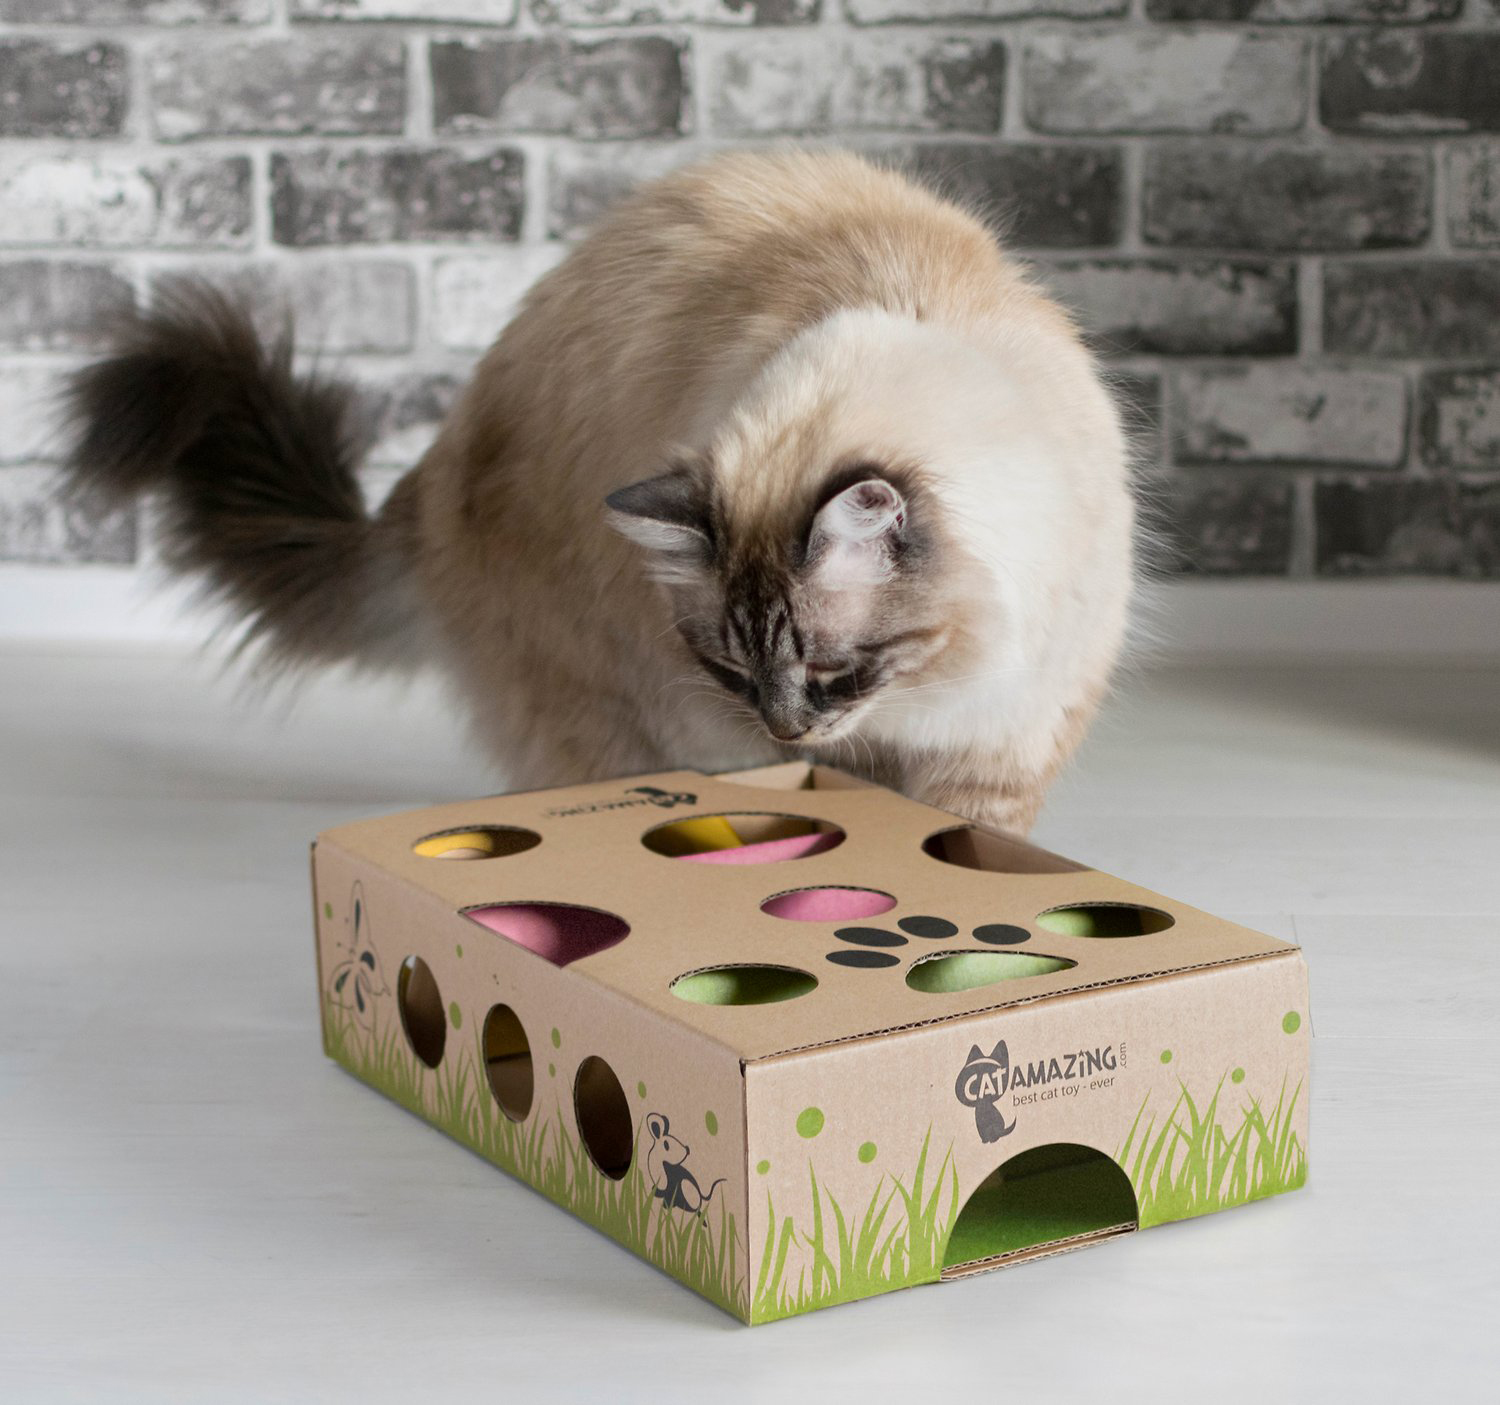 Puzzle Toys for Cats